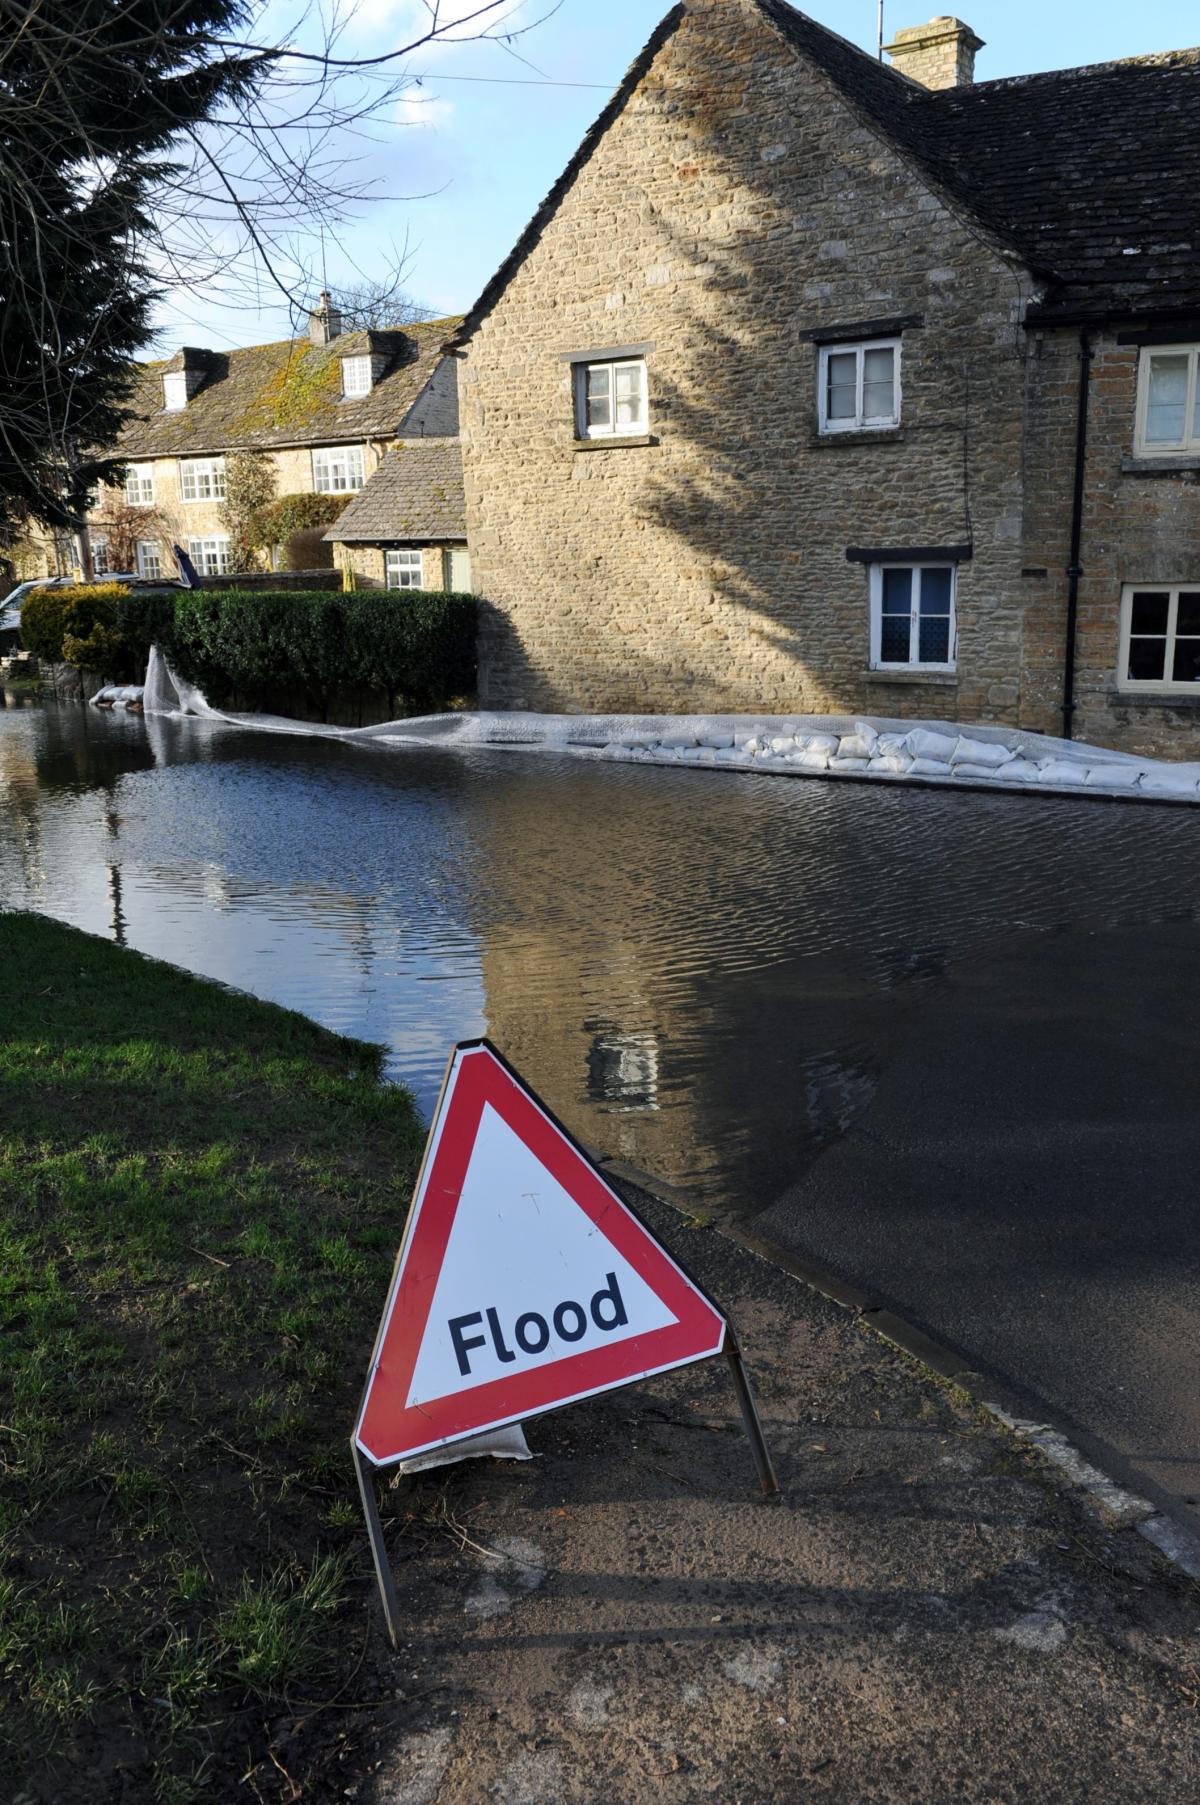 Flooding in South Cerney, Gloucestershire